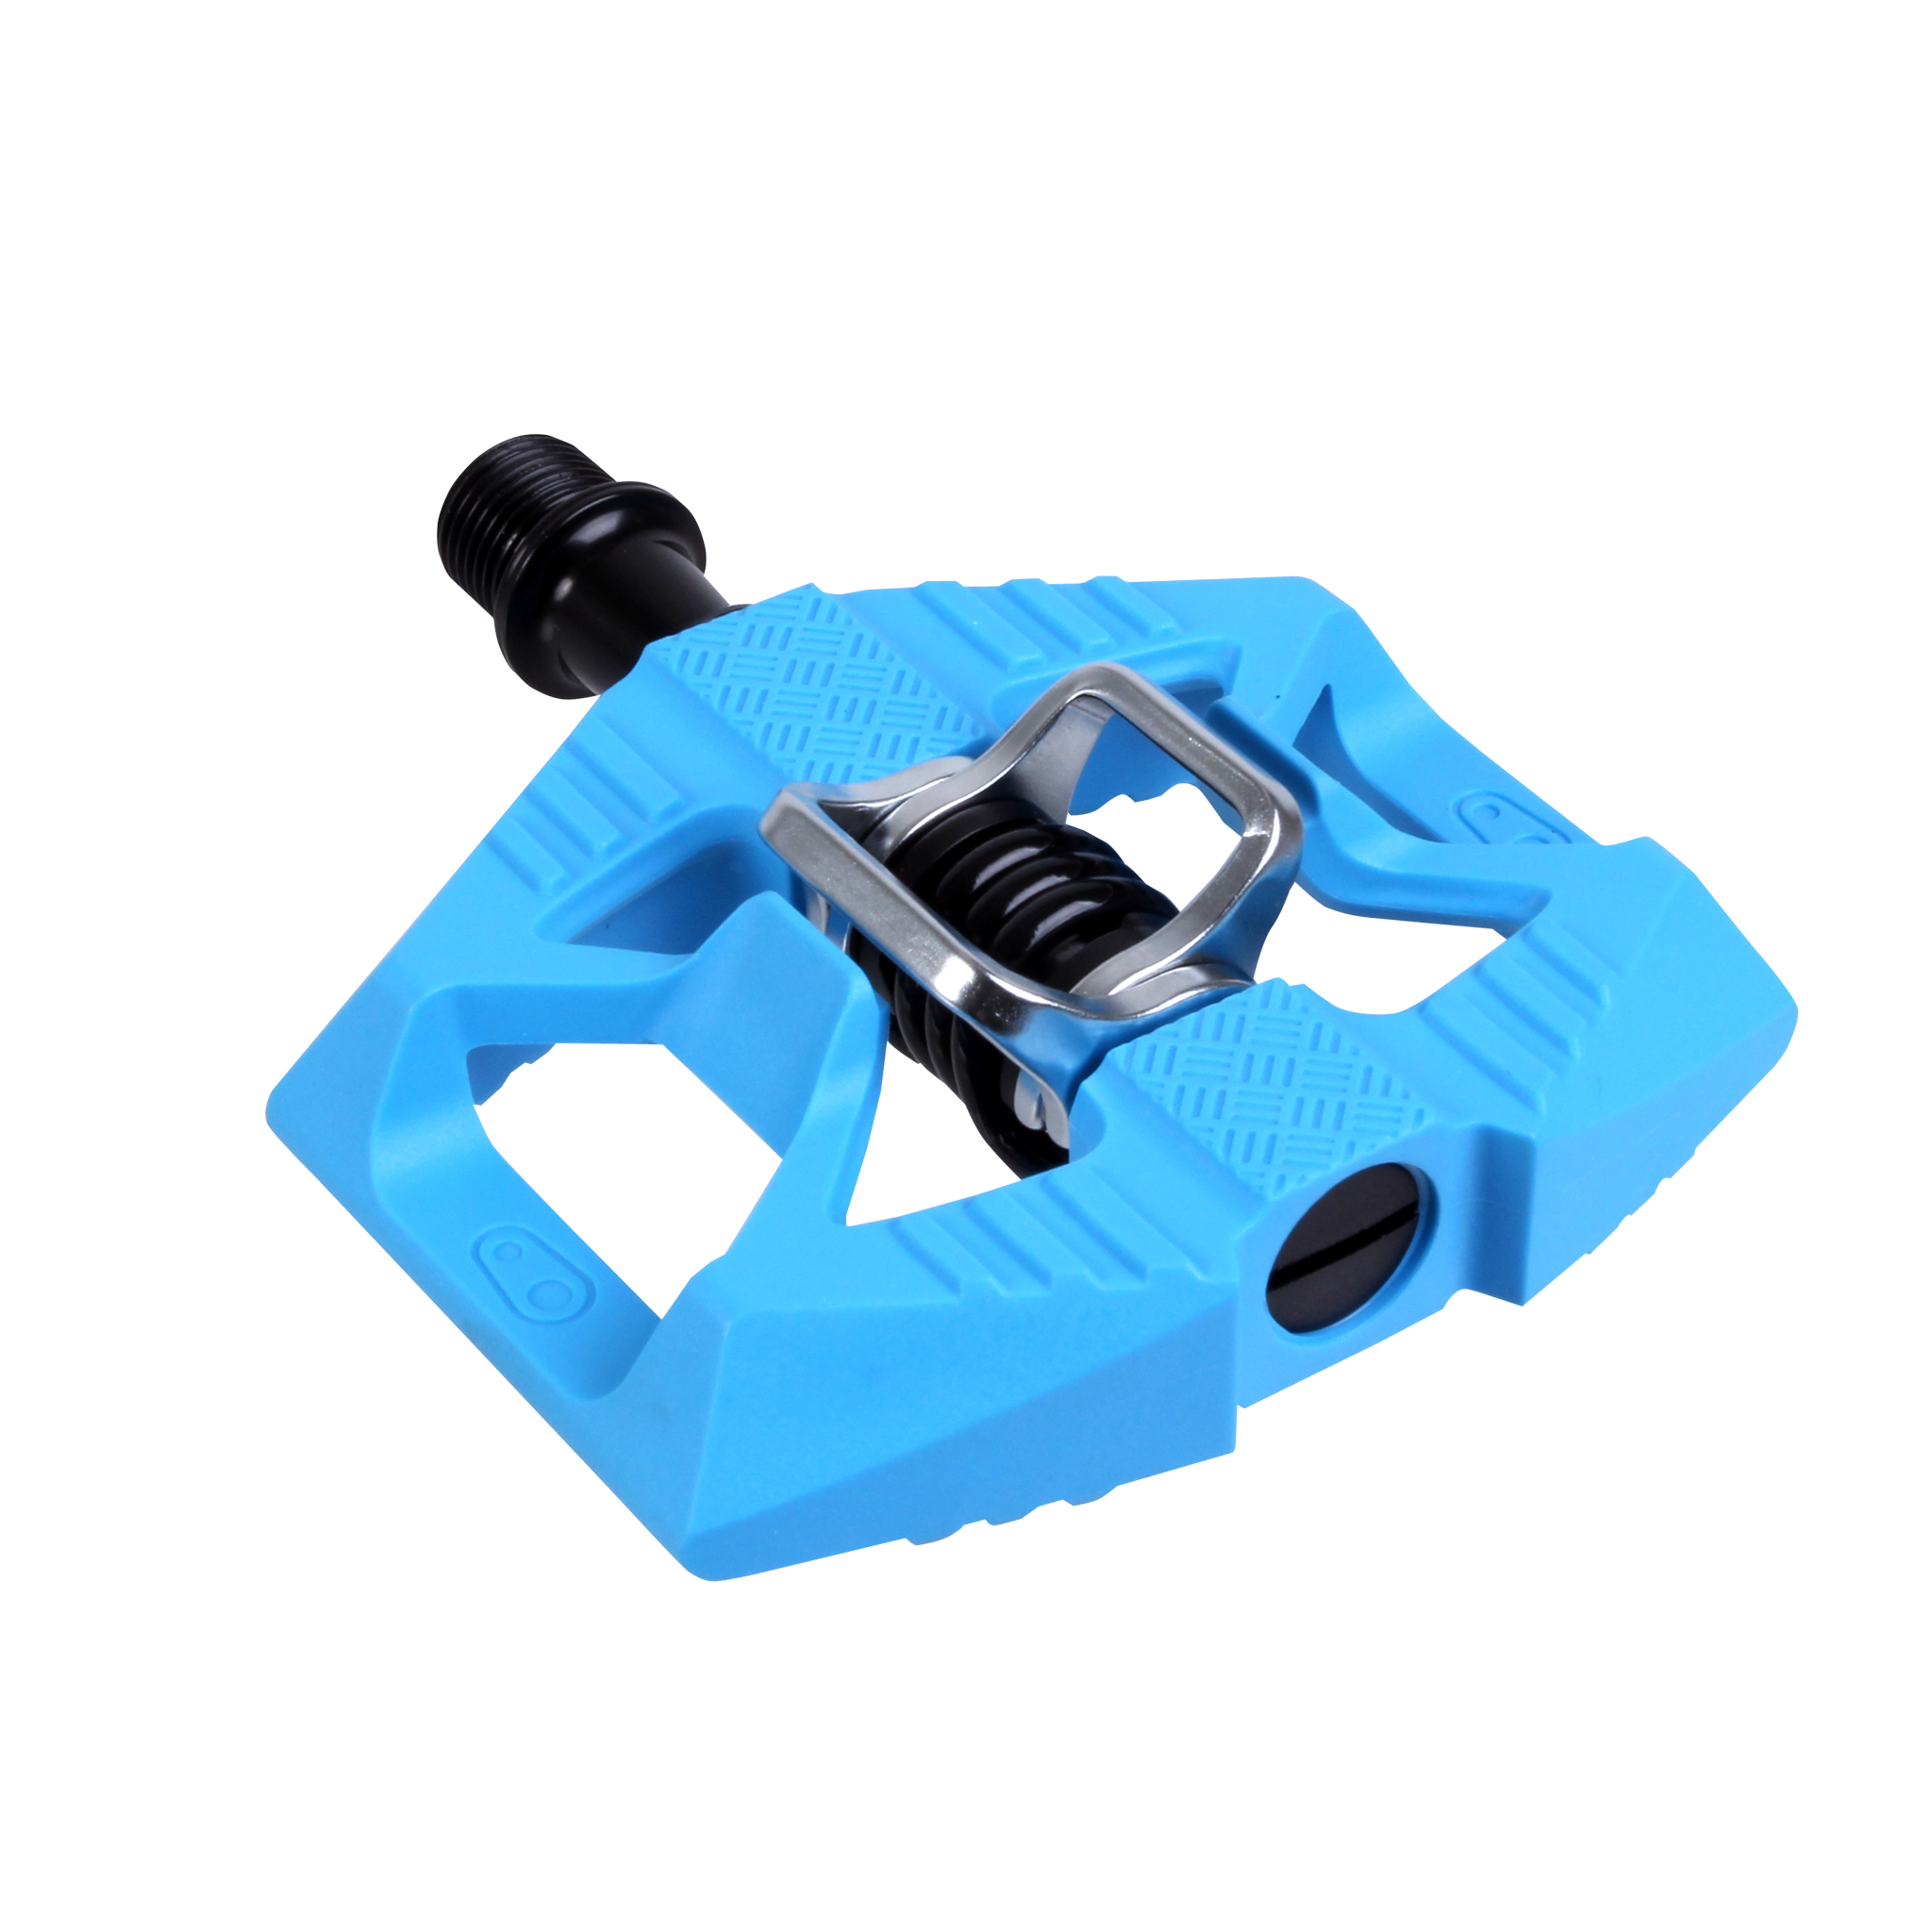 Crankbrothers Double Shot 1 Hybrid Pedals, Blue